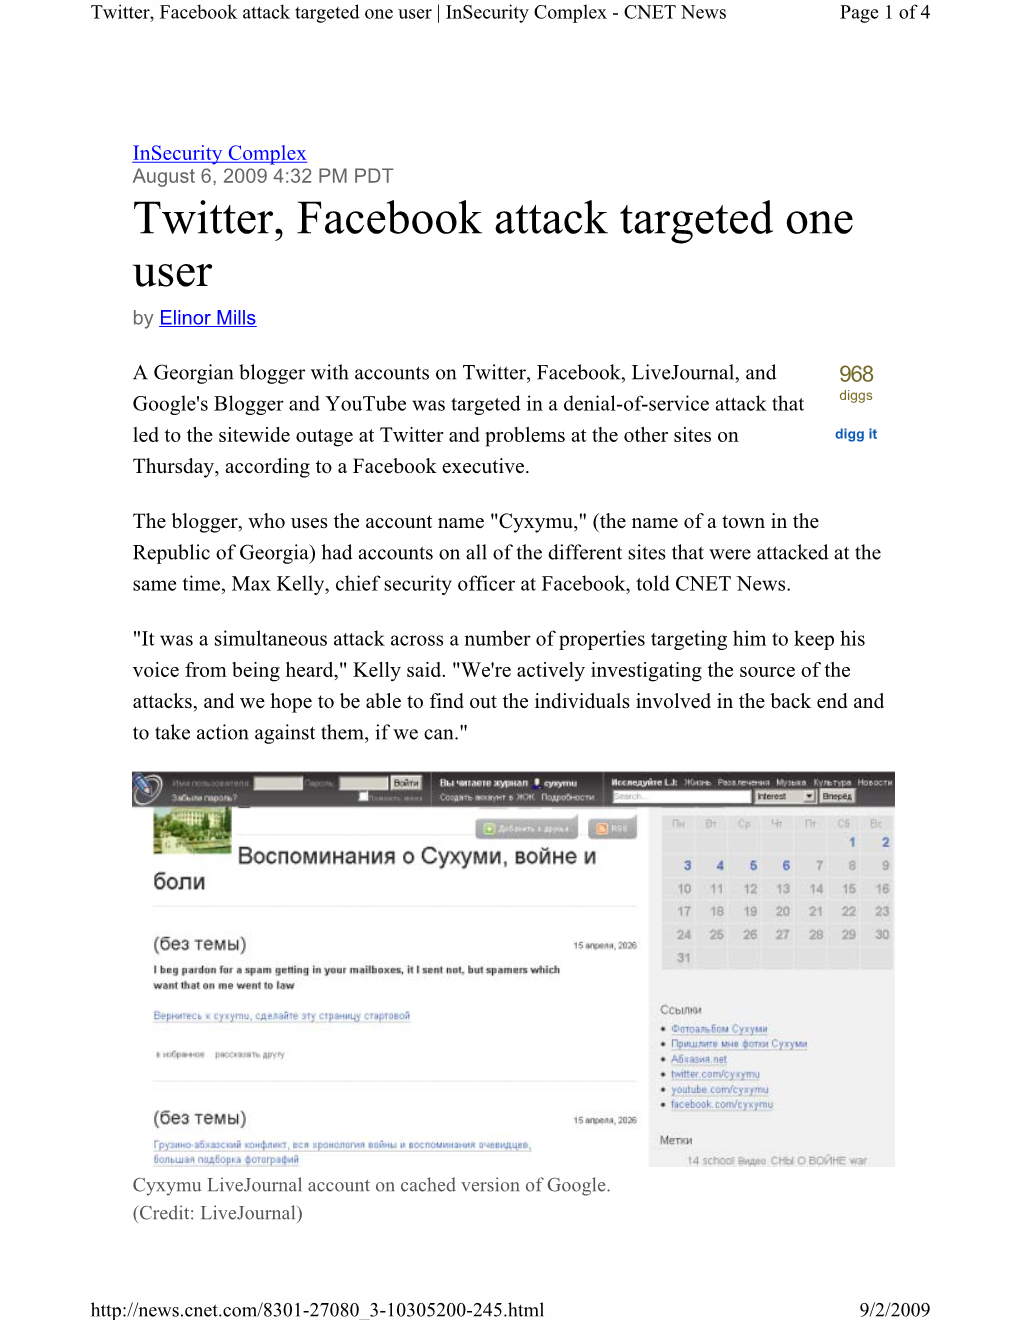 Twitter, Facebook Attack Targeted One User | Insecurity Complex - CNET News Page 1 of 4